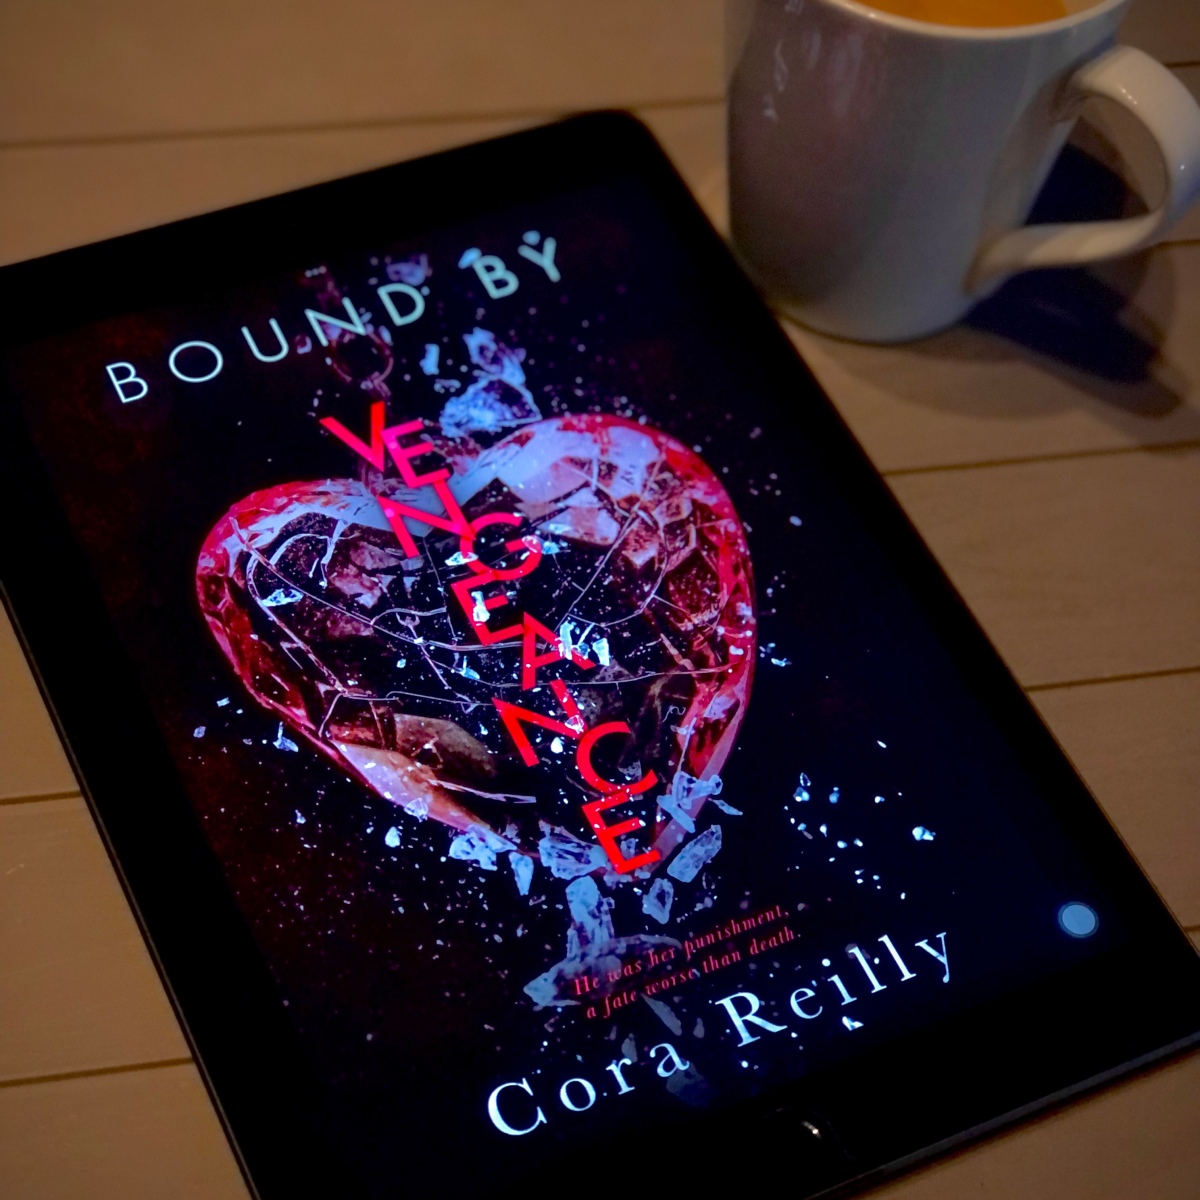 BOUND BY VENGEANCE (Born in blood mafia chronicles #5) by Cora Reilly